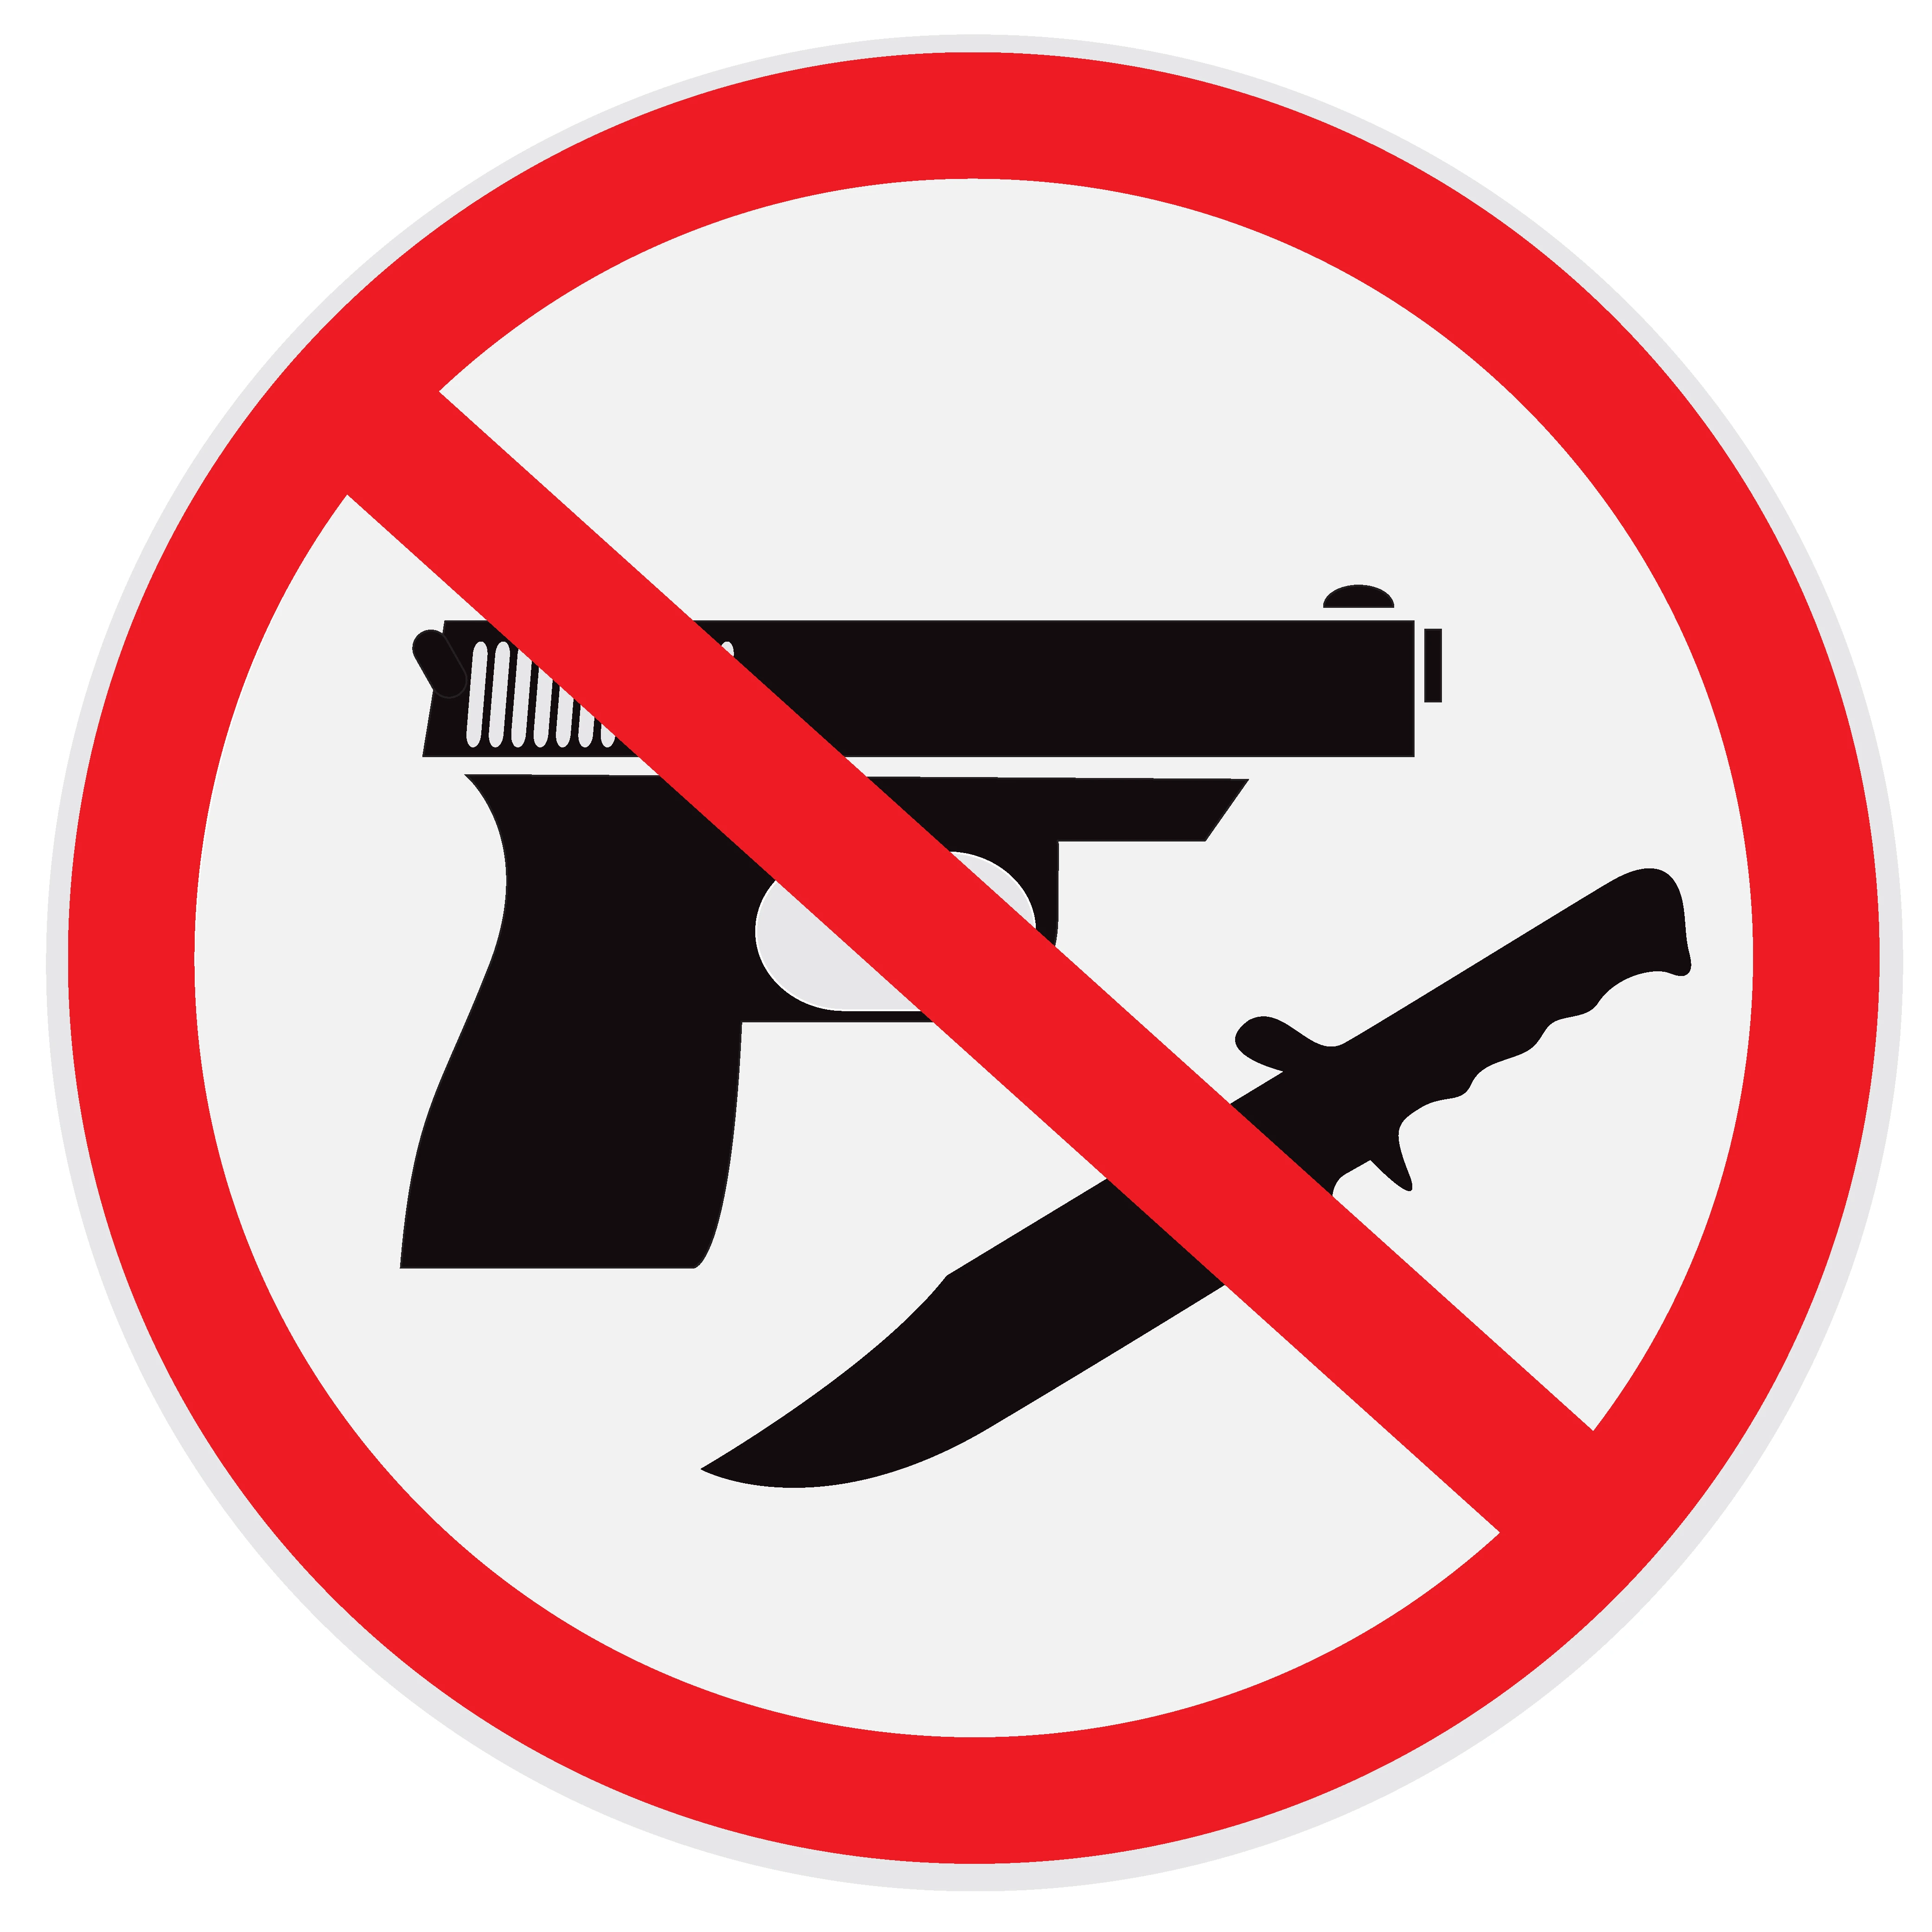 No weapon allowed, prohibited, sign CustomDesigned Illustrations